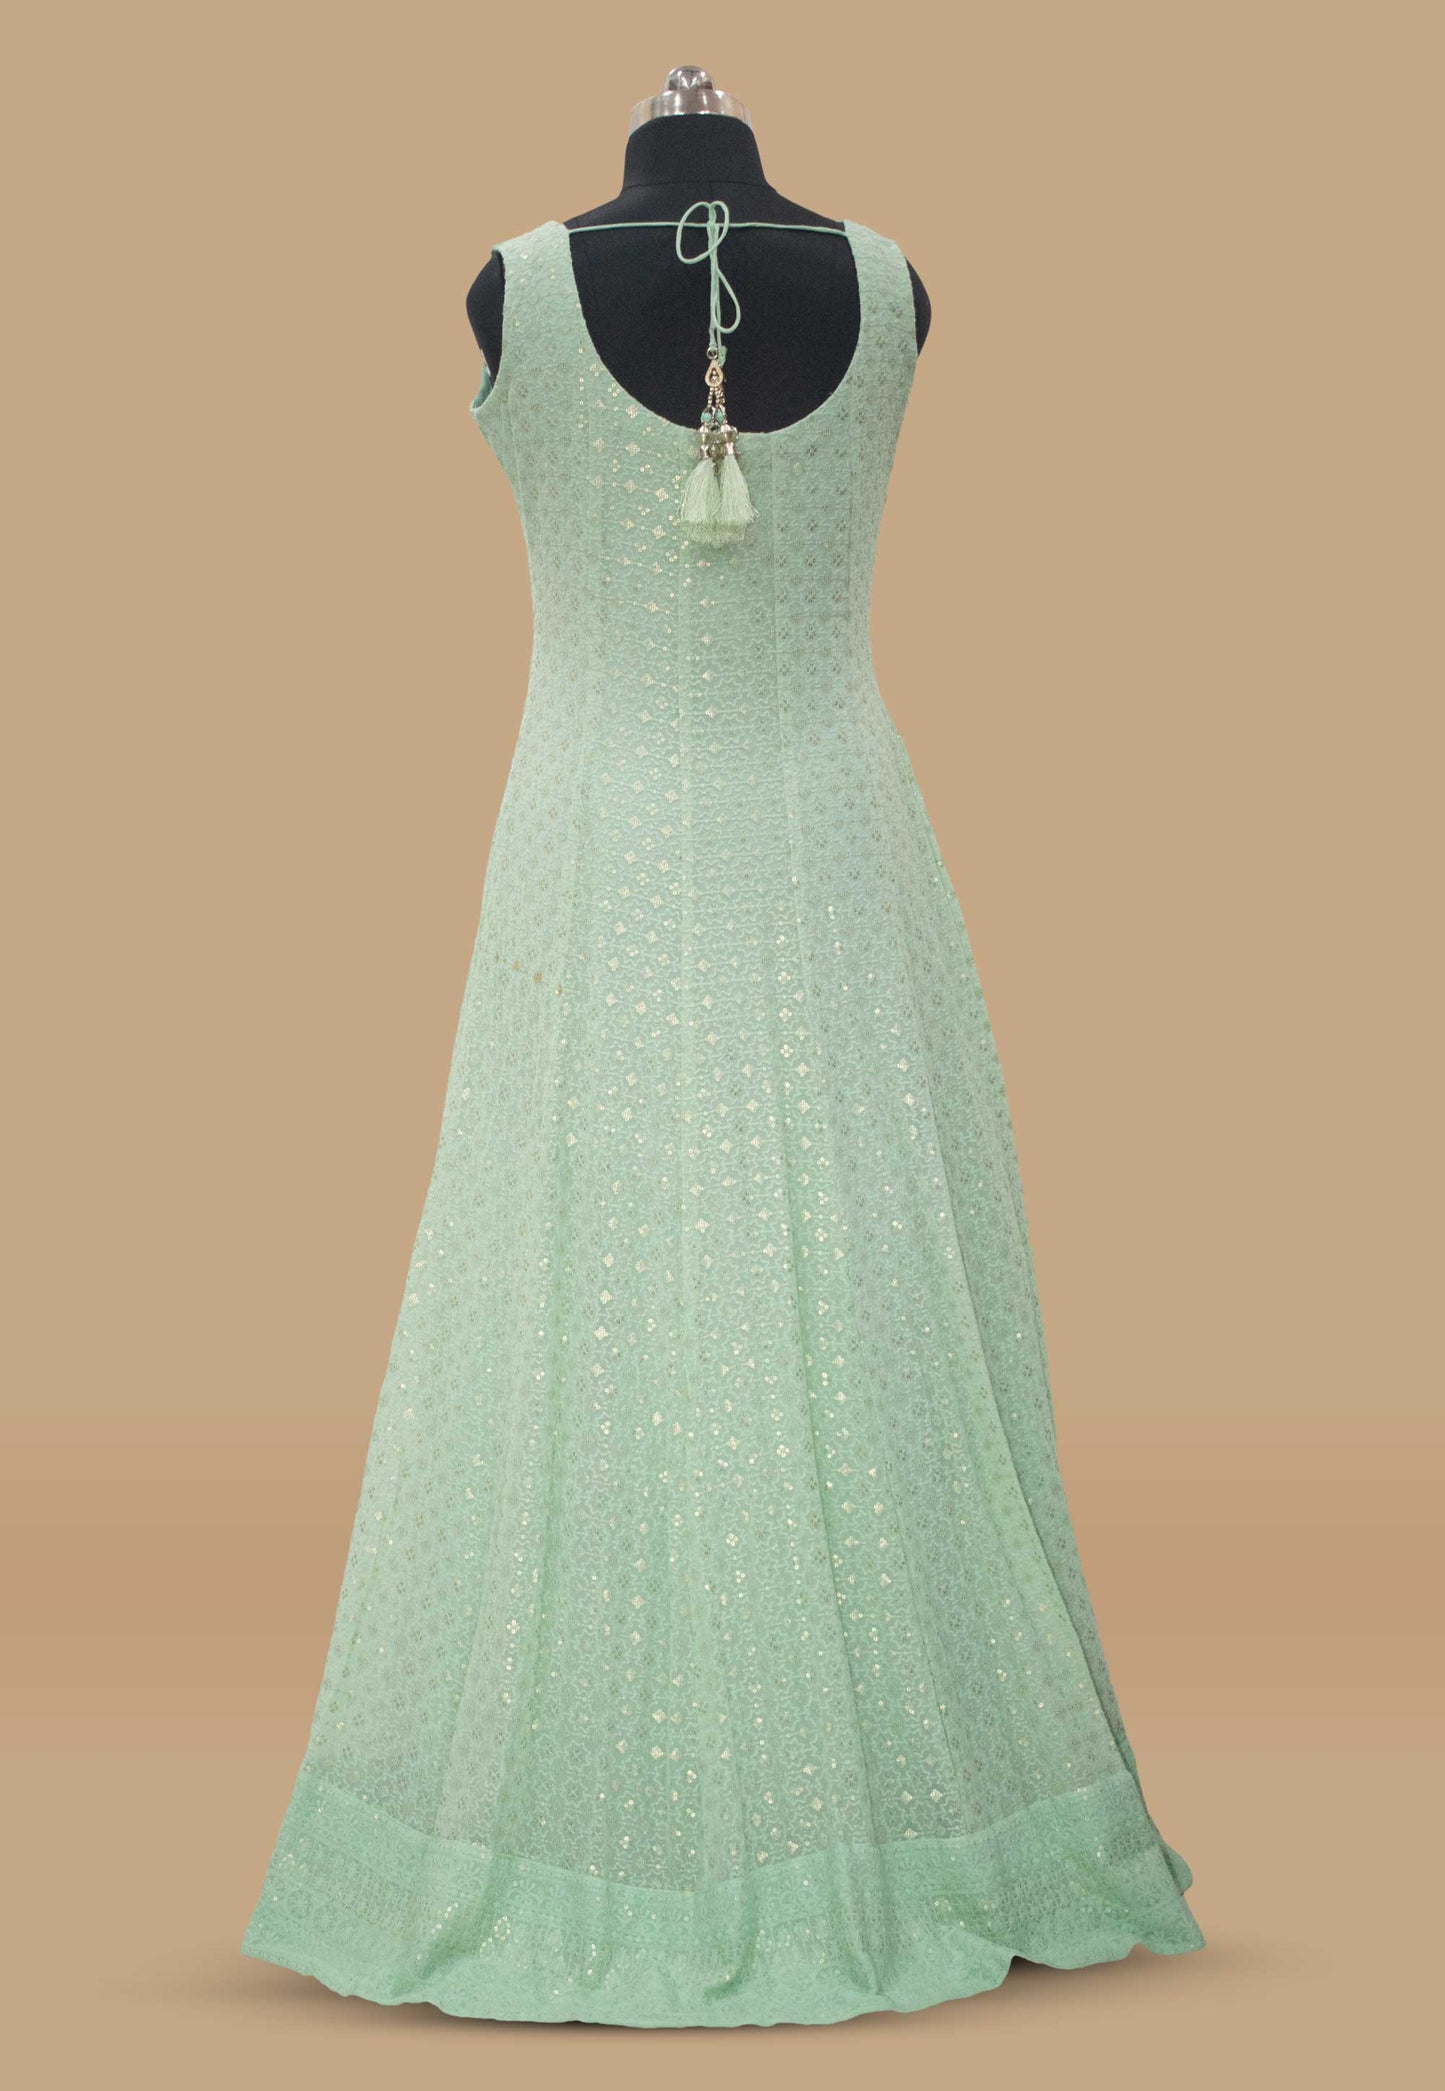 Embroidered Georgette Anarkali Suit in Sea Green